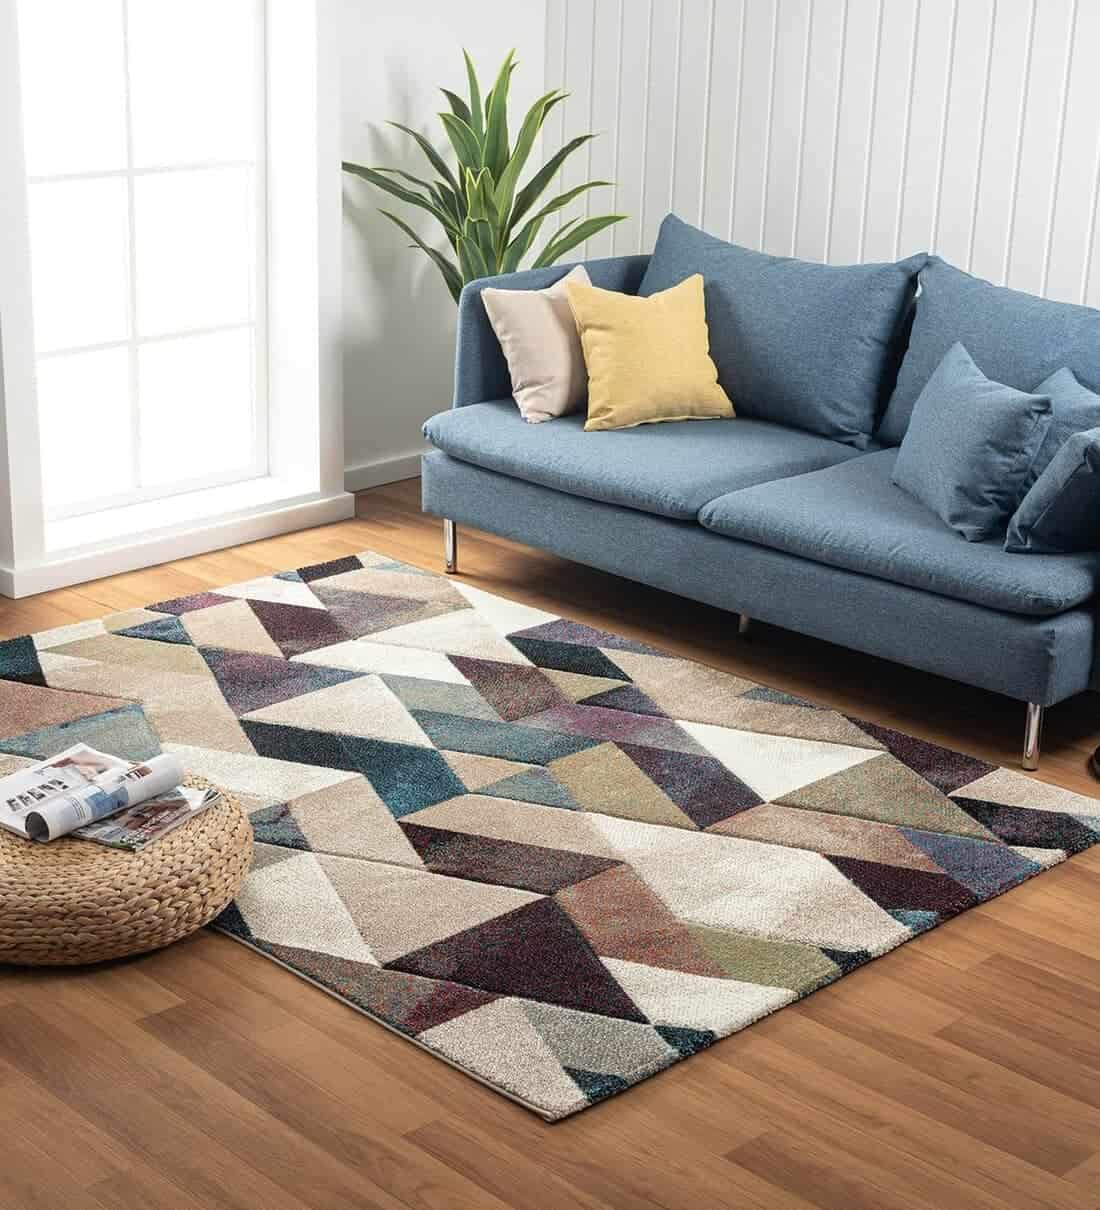 geometric pattern type carpet with blue sofa in a living room